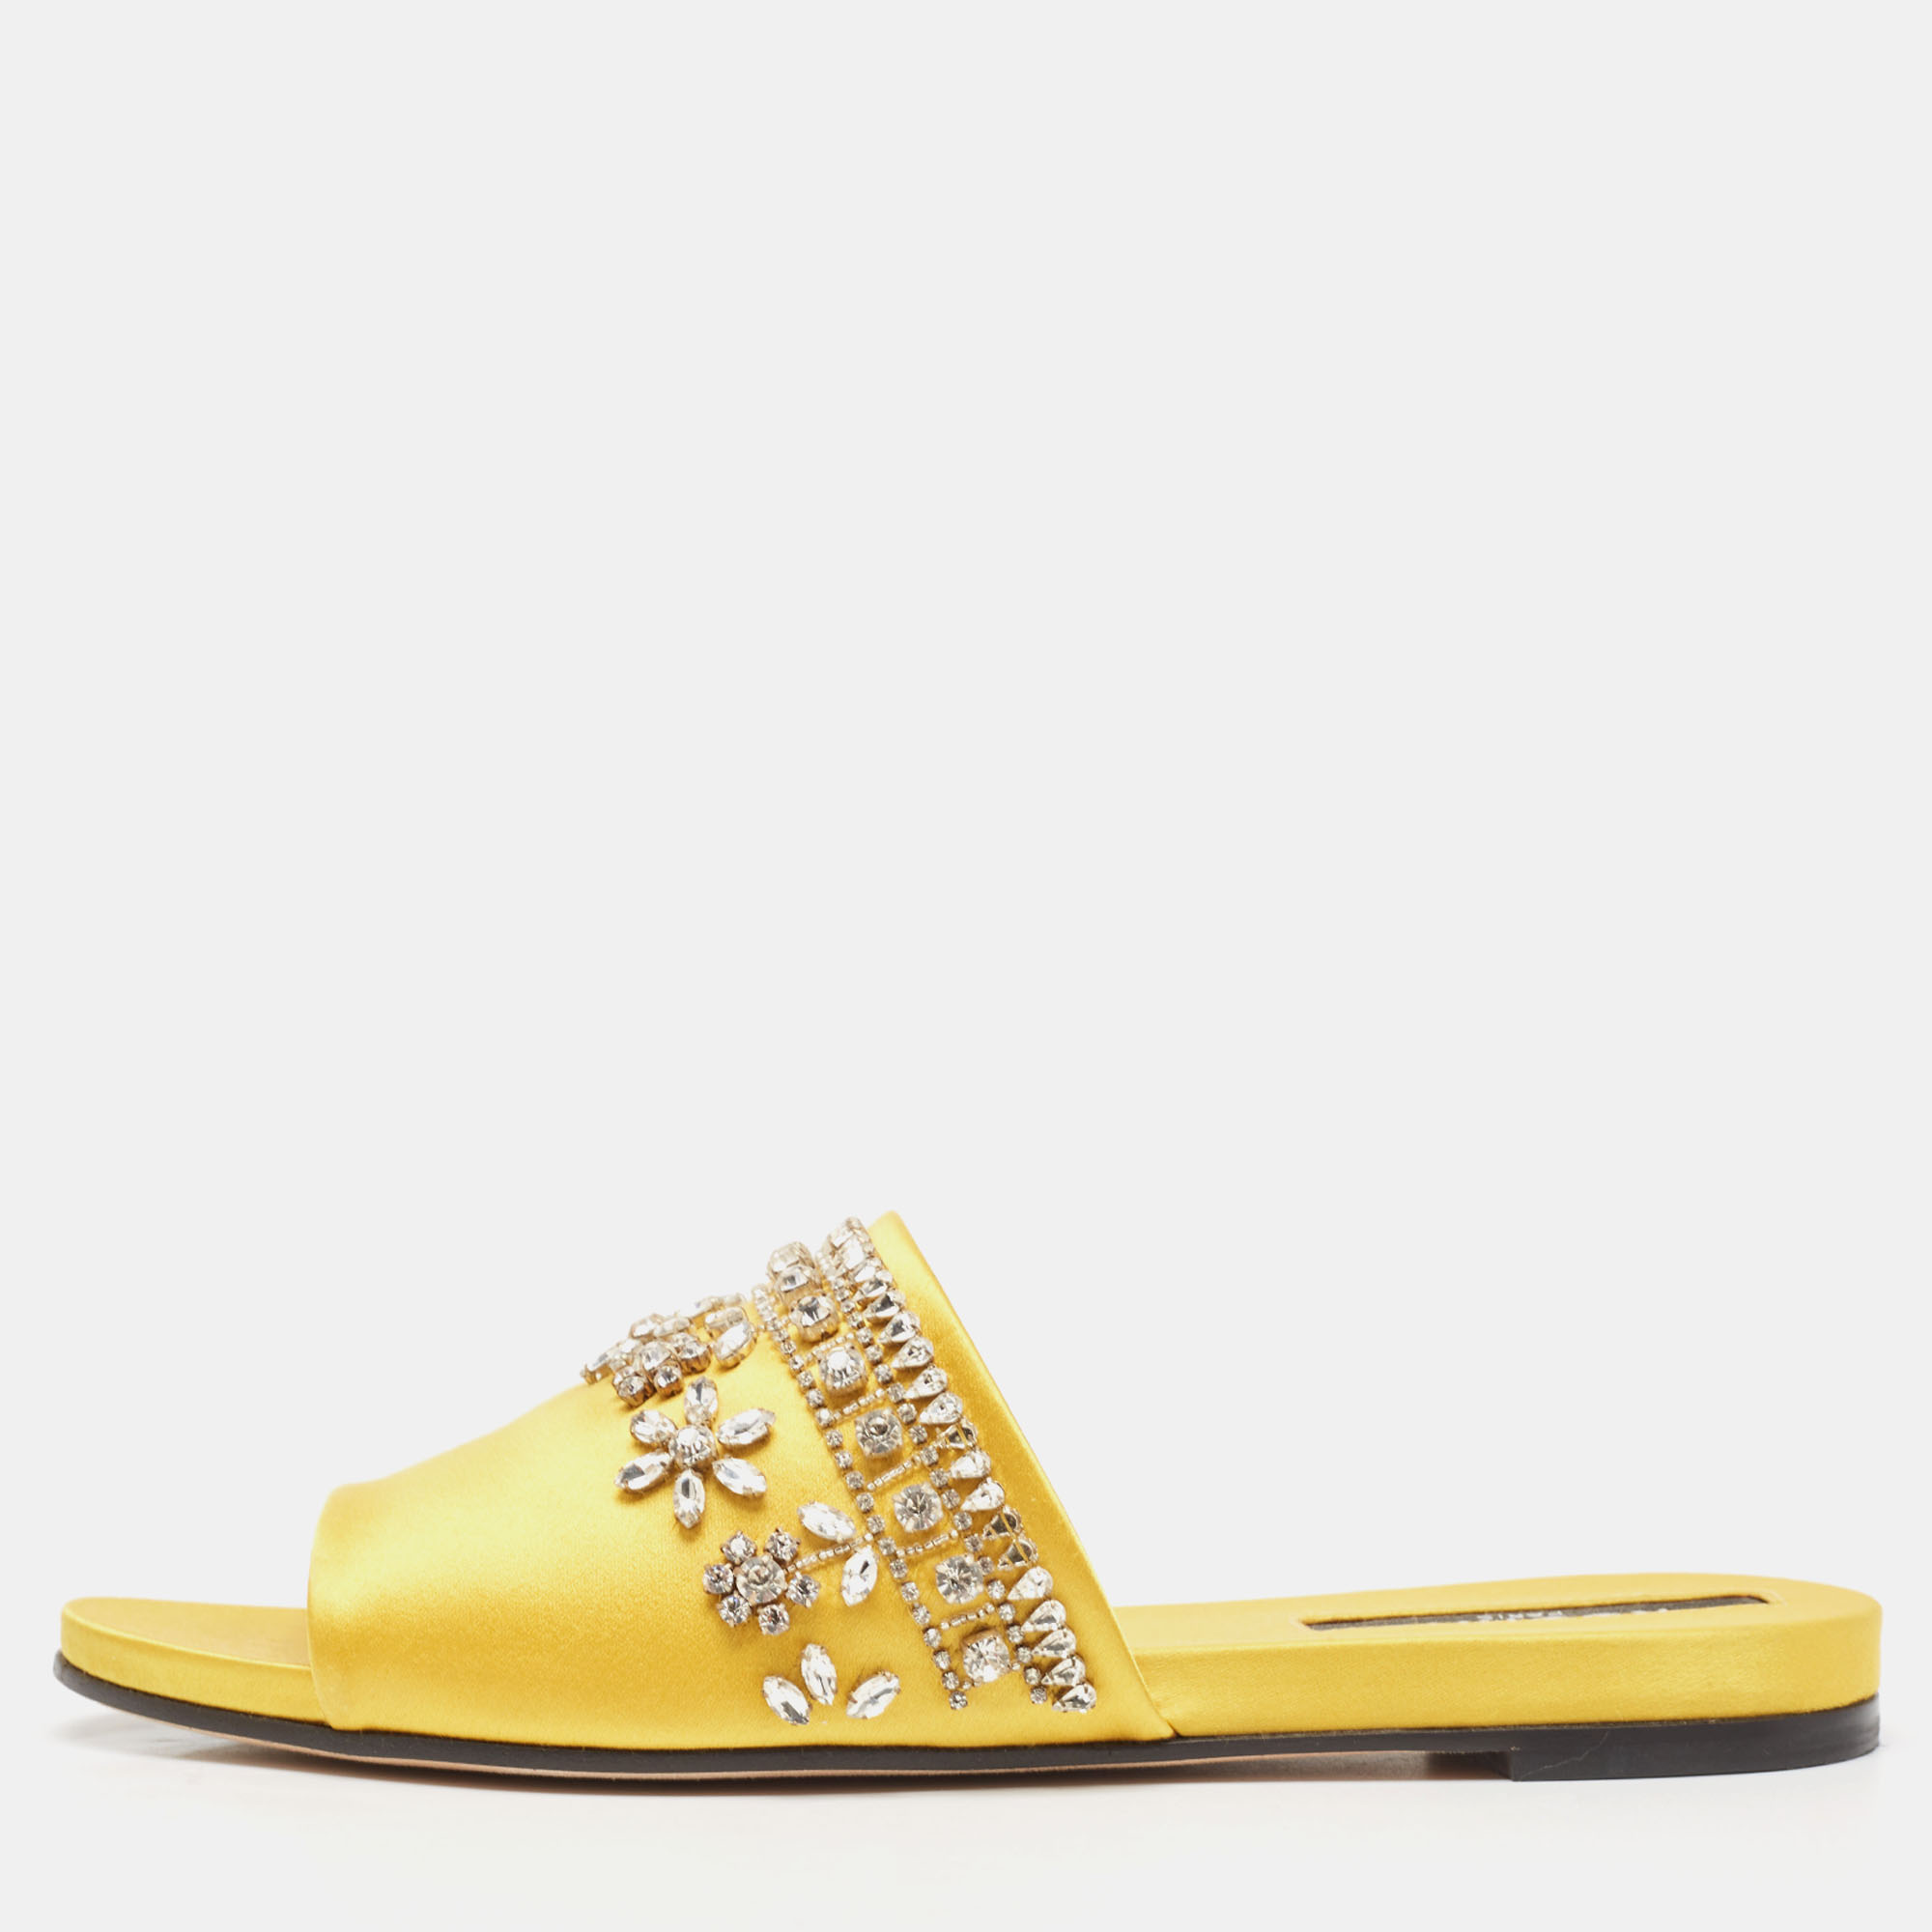 Pre-owned Rochas Yellow Satin Crystal Embellished Flat Slides Size 38